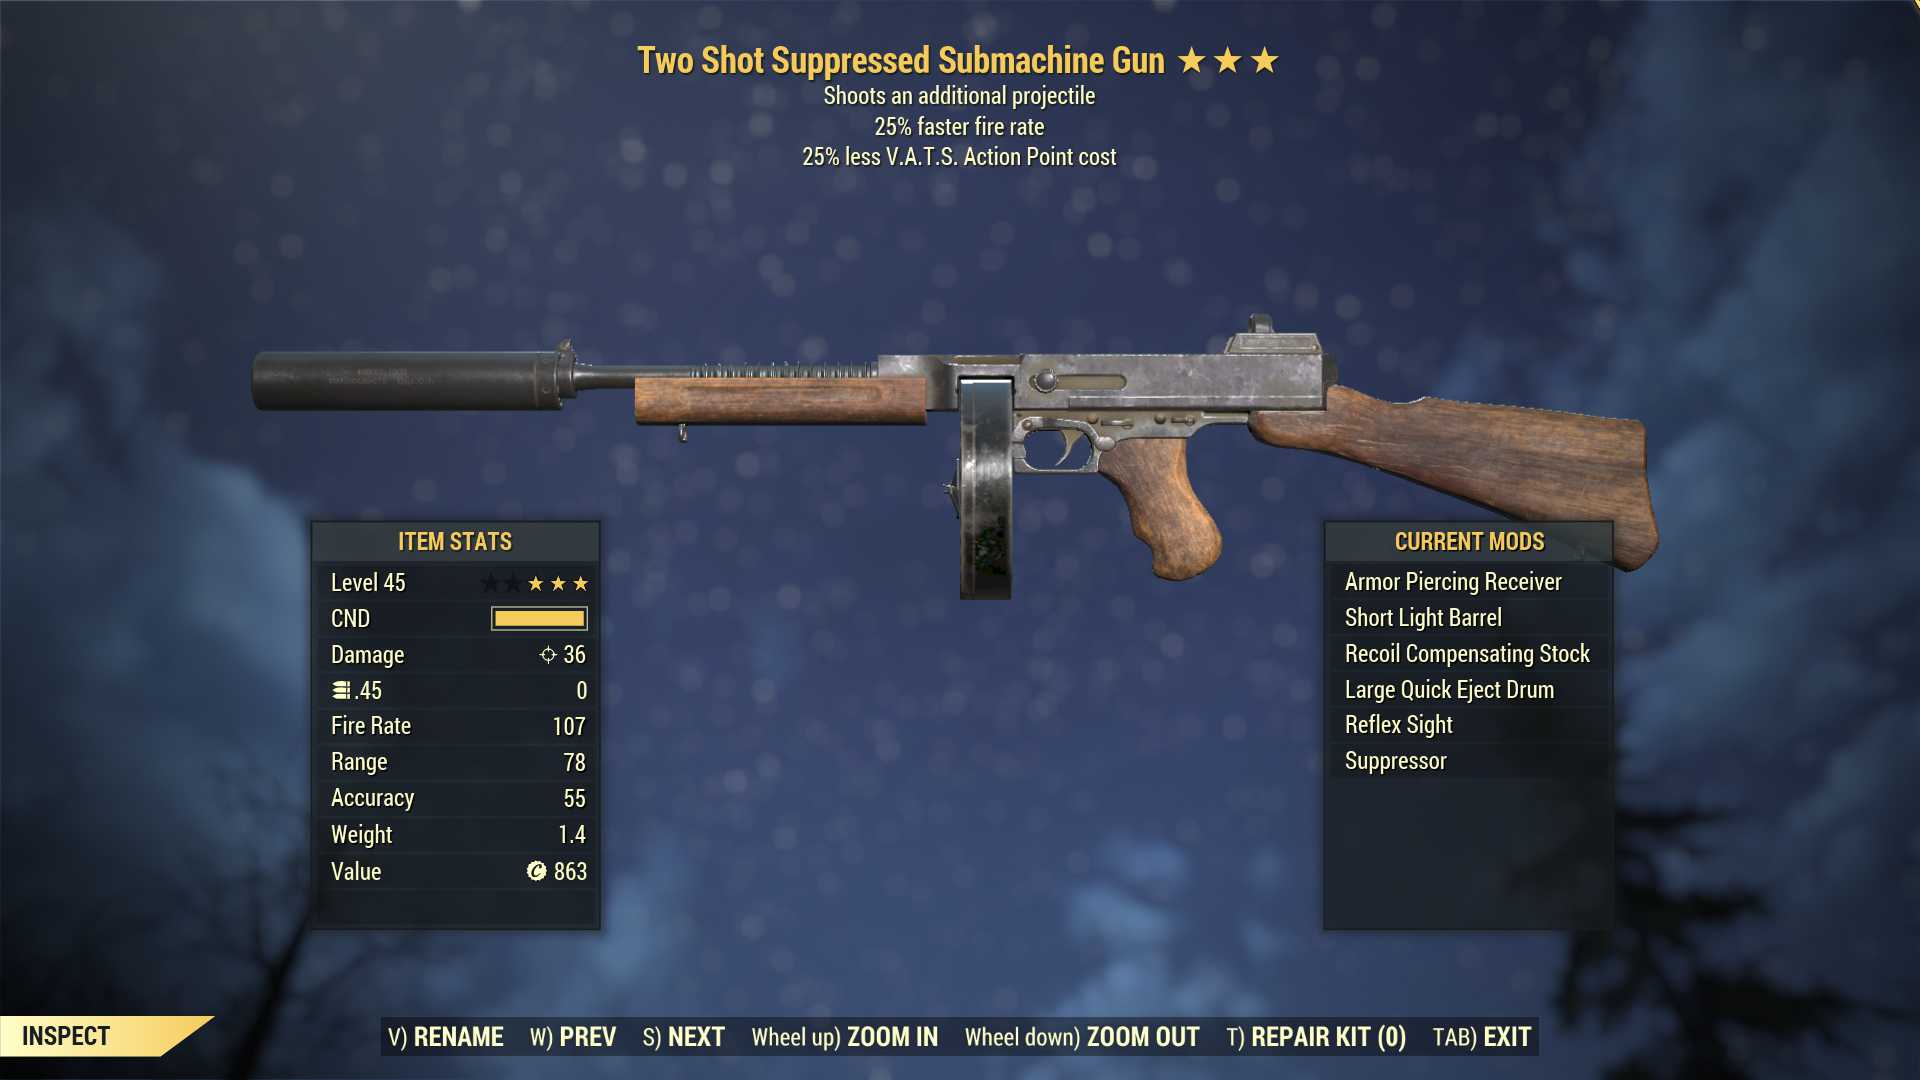 Two Shot Submachine Gun (25% faster fire rate, 25% less VATS AP cost)